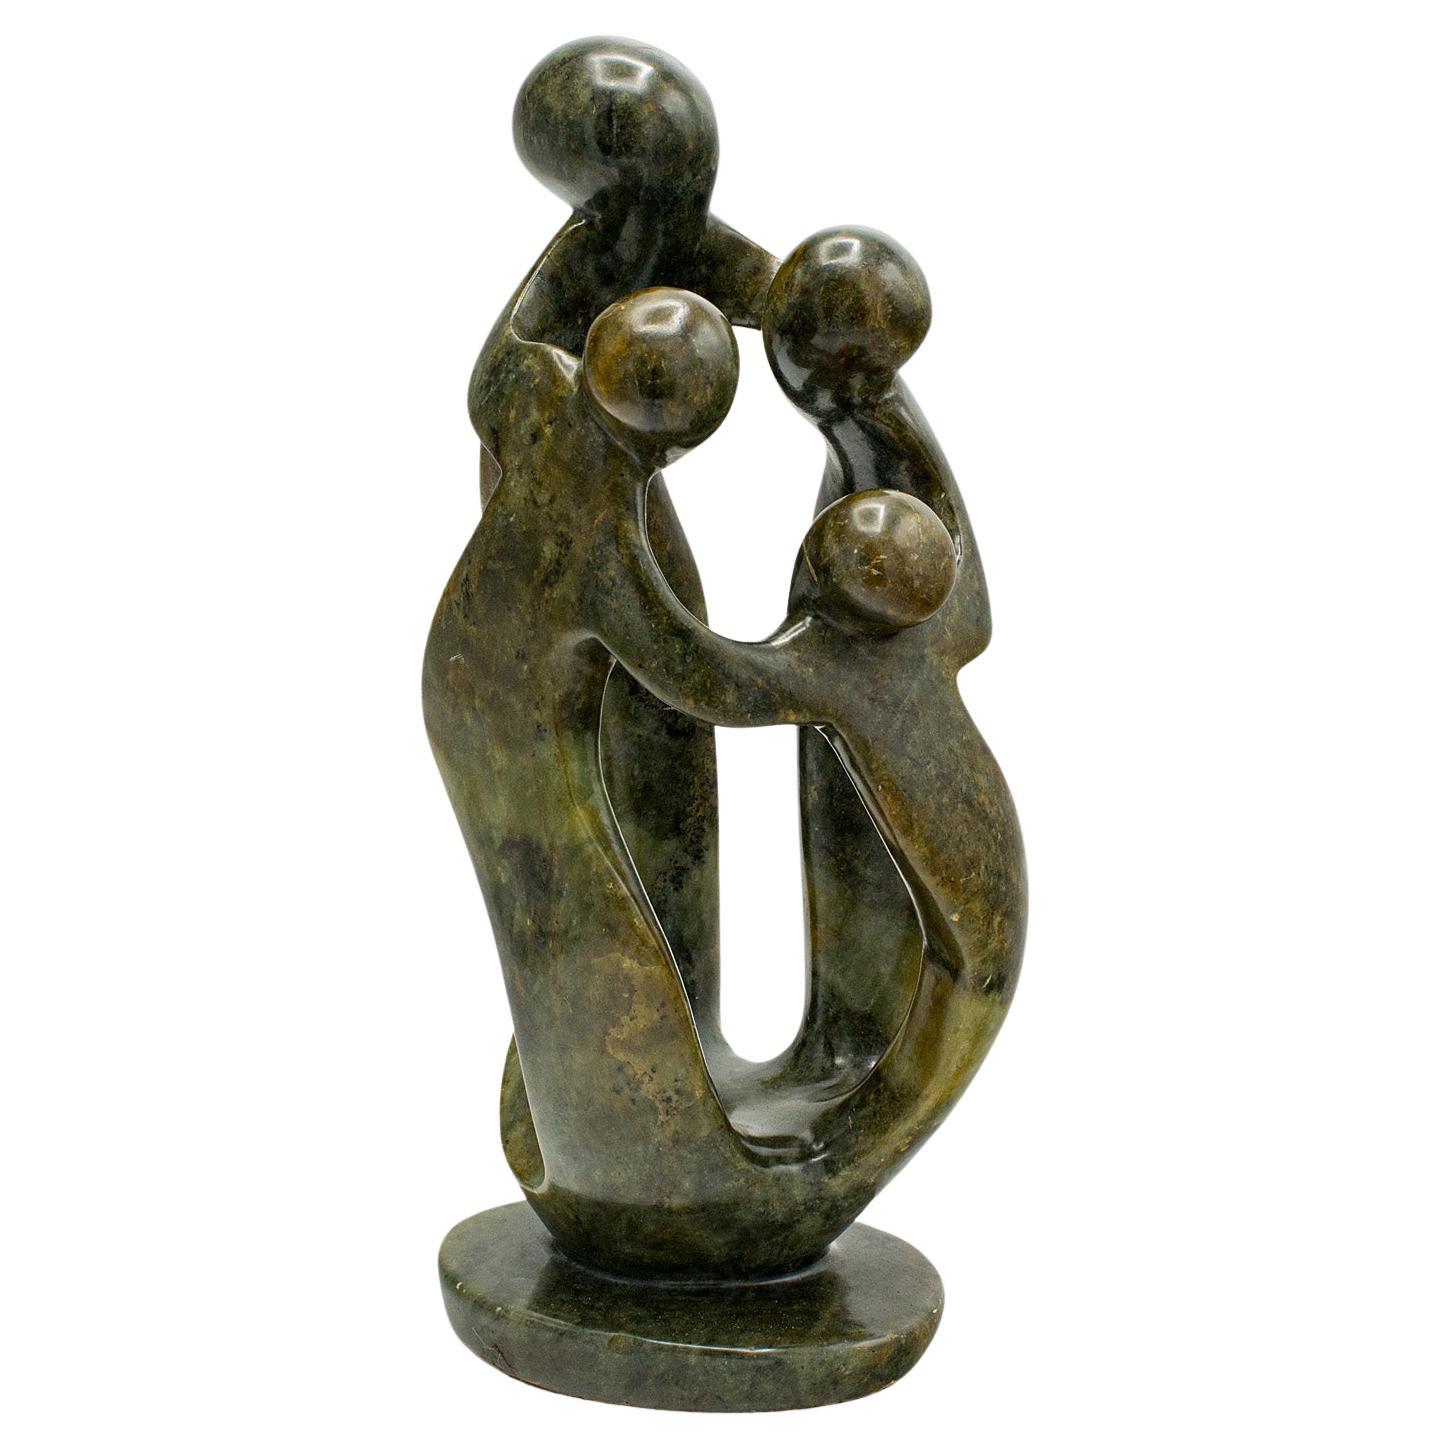 Vintage Abstract Family Statue, Tribal, Hardstone, Decorative Ornament, C.1960